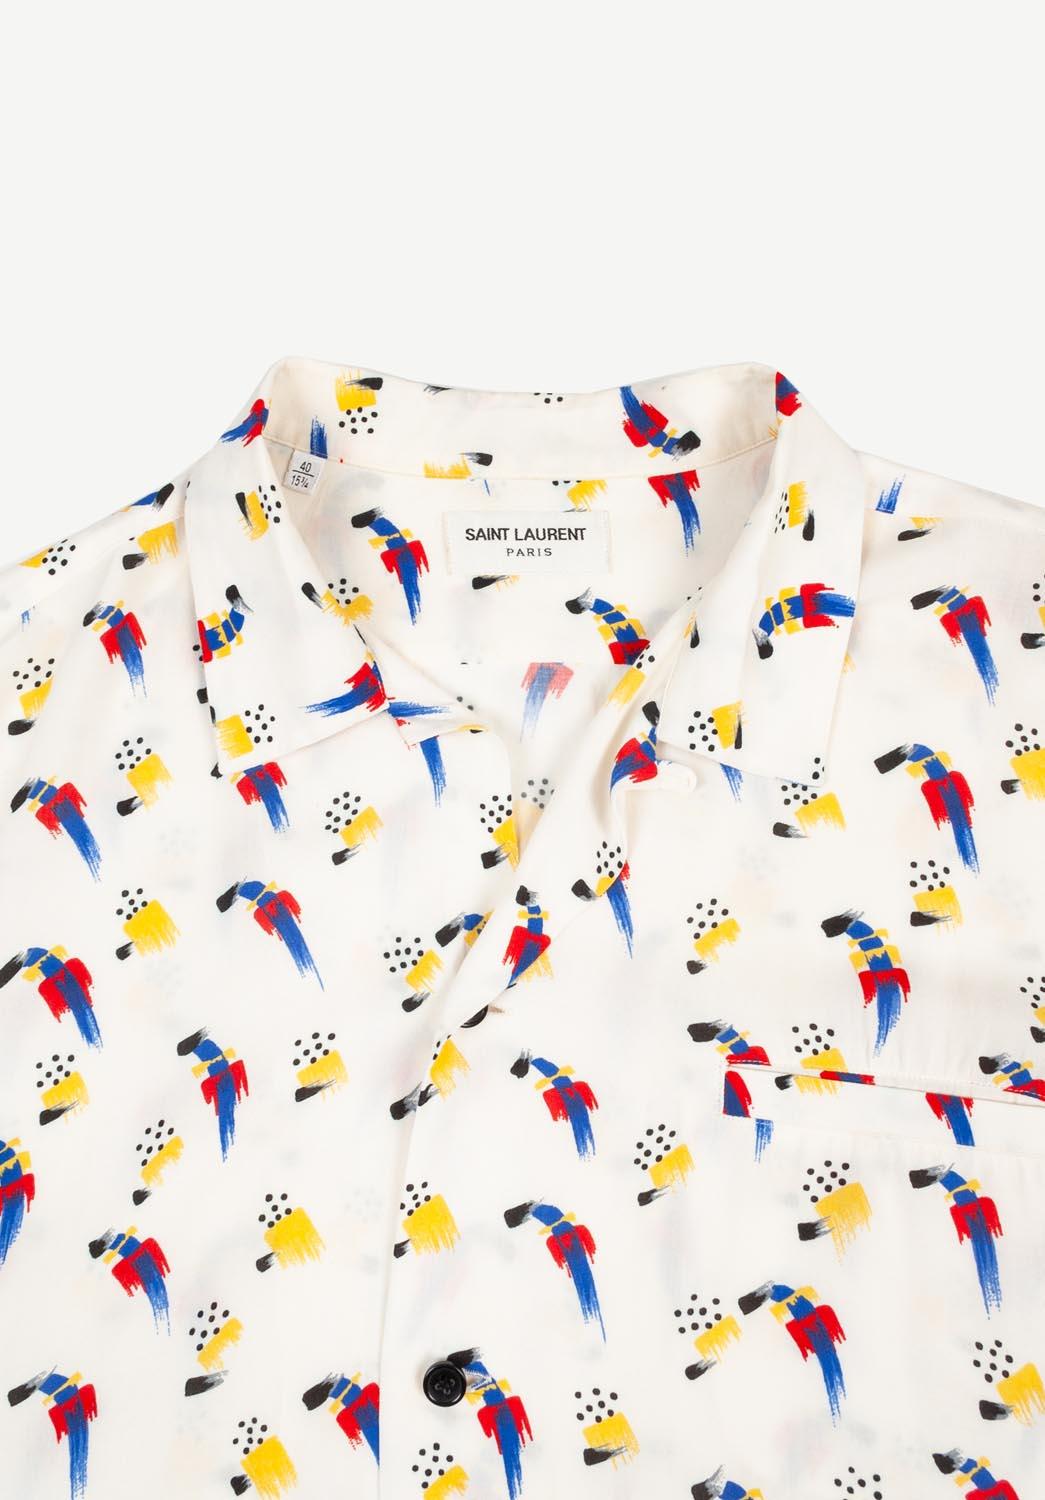 100% genuine Saint Laurent Summer Shirt, S639 
Color: multi
(An actual color may a bit vary due to individual computer screen interpretation)
Material: 100% viscose
Tag size: Large
This shirt is great quality item. Rate 9 of 10, excellent